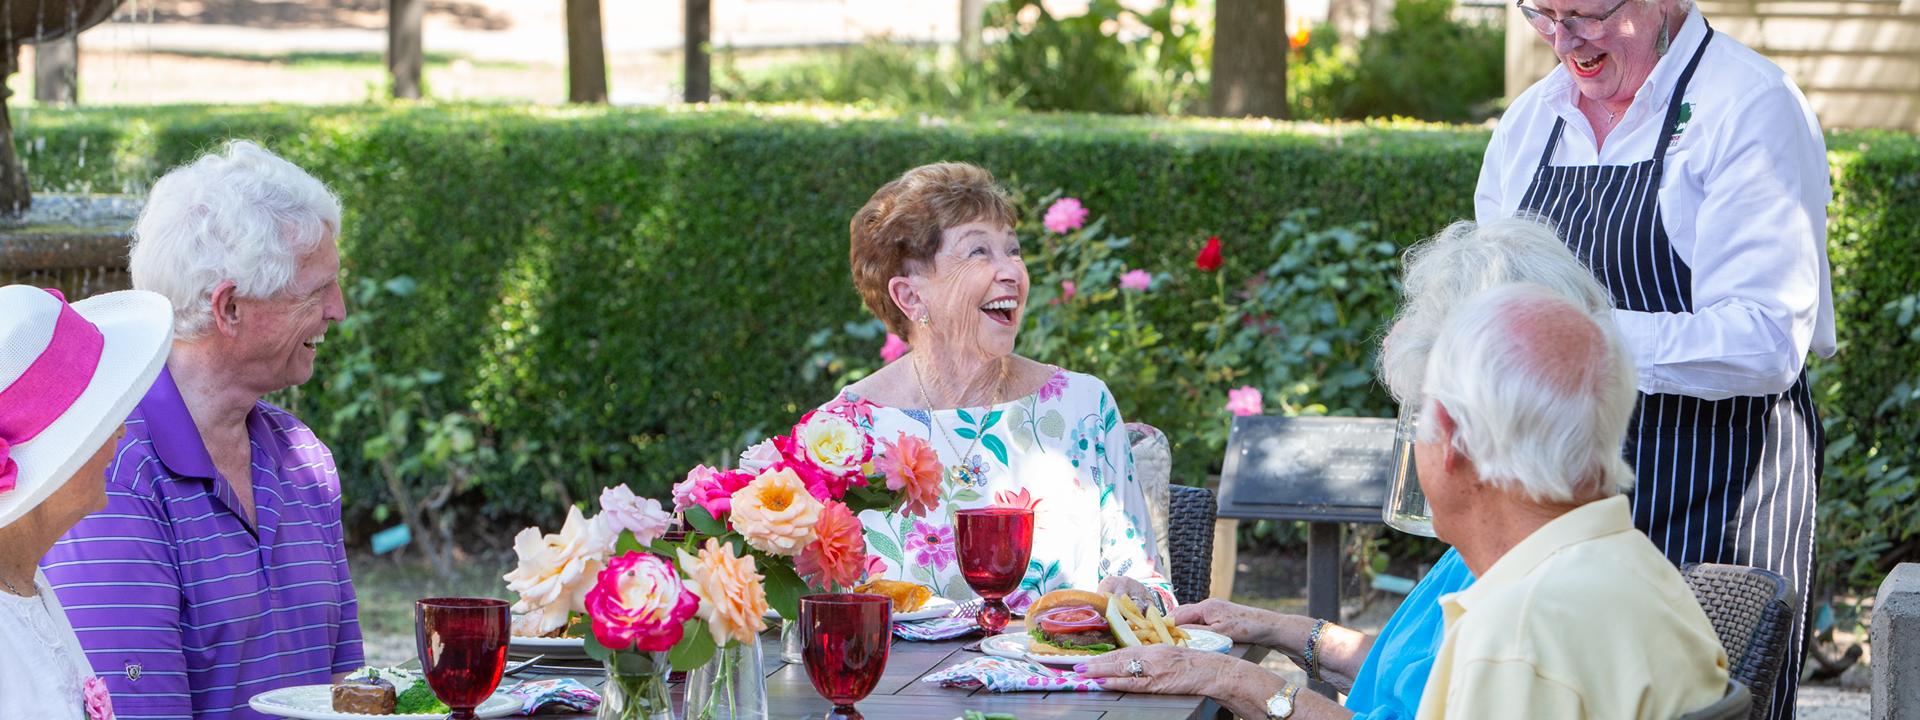 Residents laughing and enjoying lunch on the patio